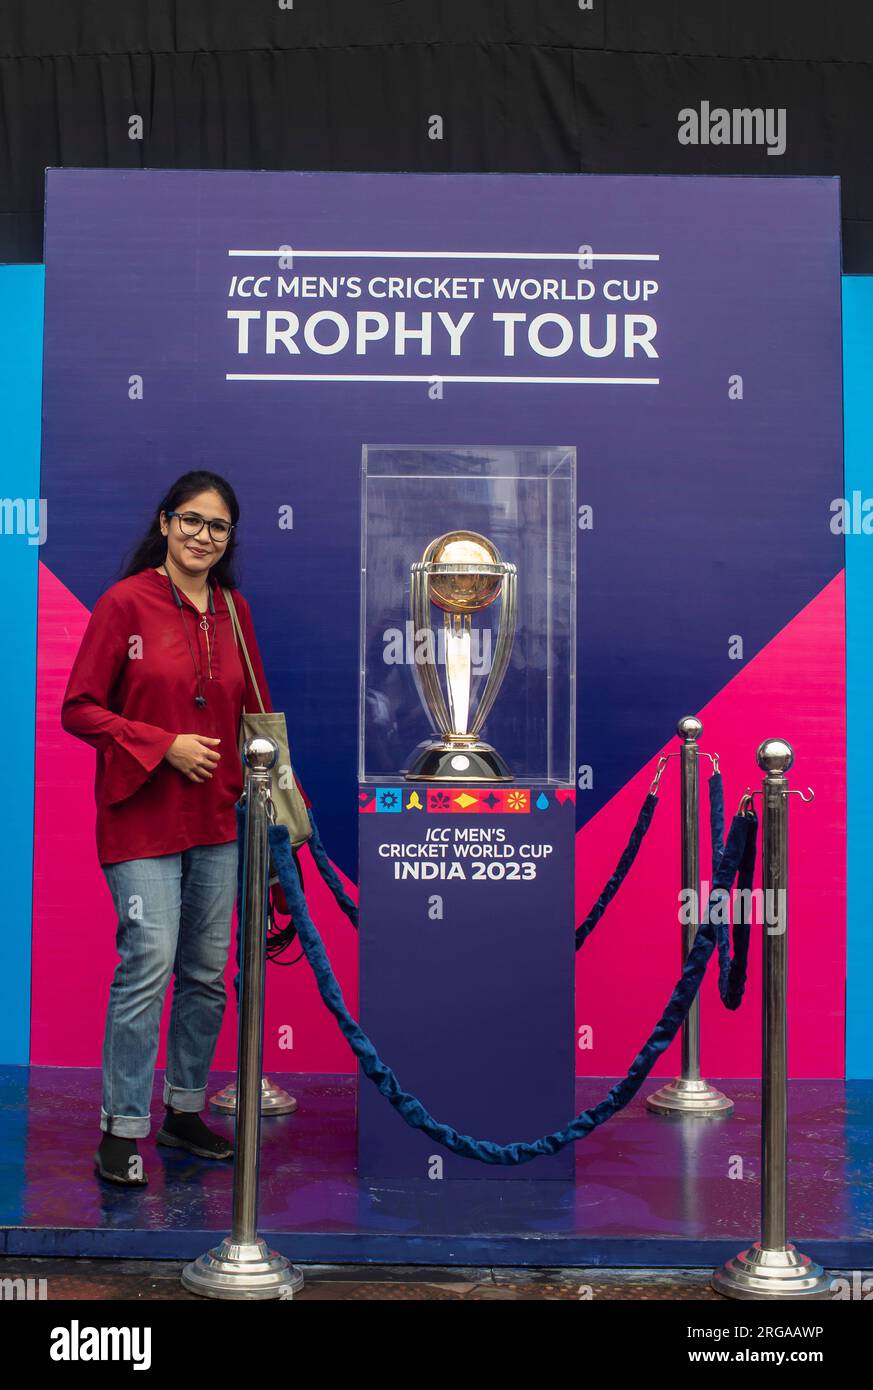 A sports journalist poses for a photo next to the ICC Men's Cricket World Cup trophy on display at the Sher-e-Bangla National Stadium in Mirpur, Dhaka. ICC Men's Cricket World Cup trophy tour in Bangladesh runs from 07 till 09 August 2023. (Photo by Sazzad Hossain / SOPA Images/Sipa USA) Stock Photo